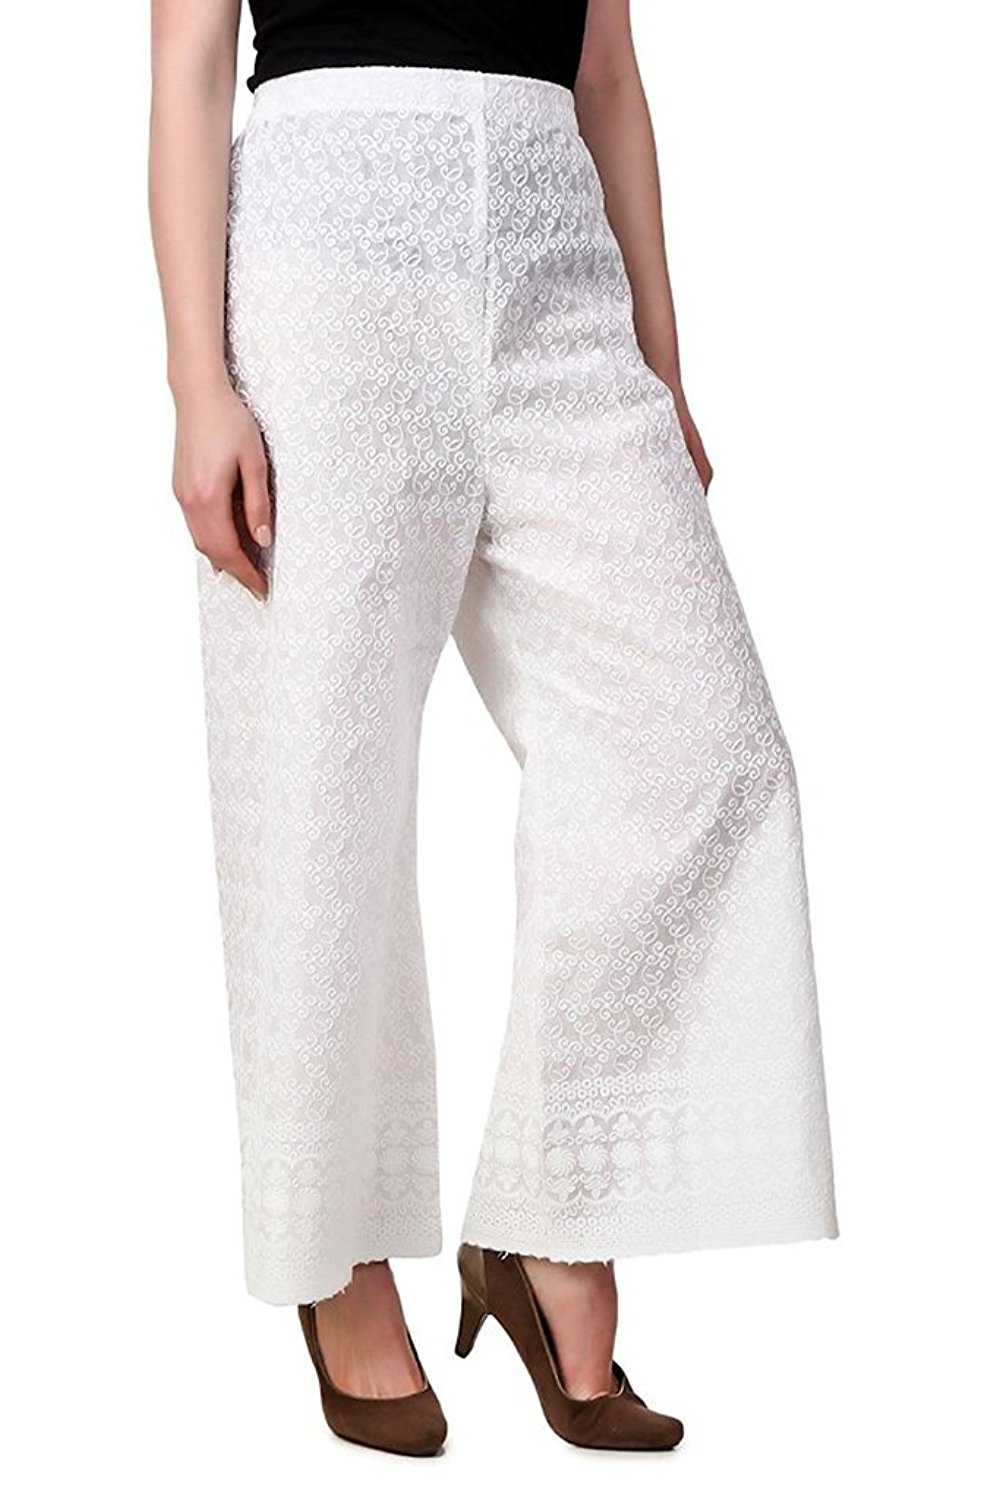 Buy Palazzo -Cotton pant for women chicken embroidery Palazzo Online ...